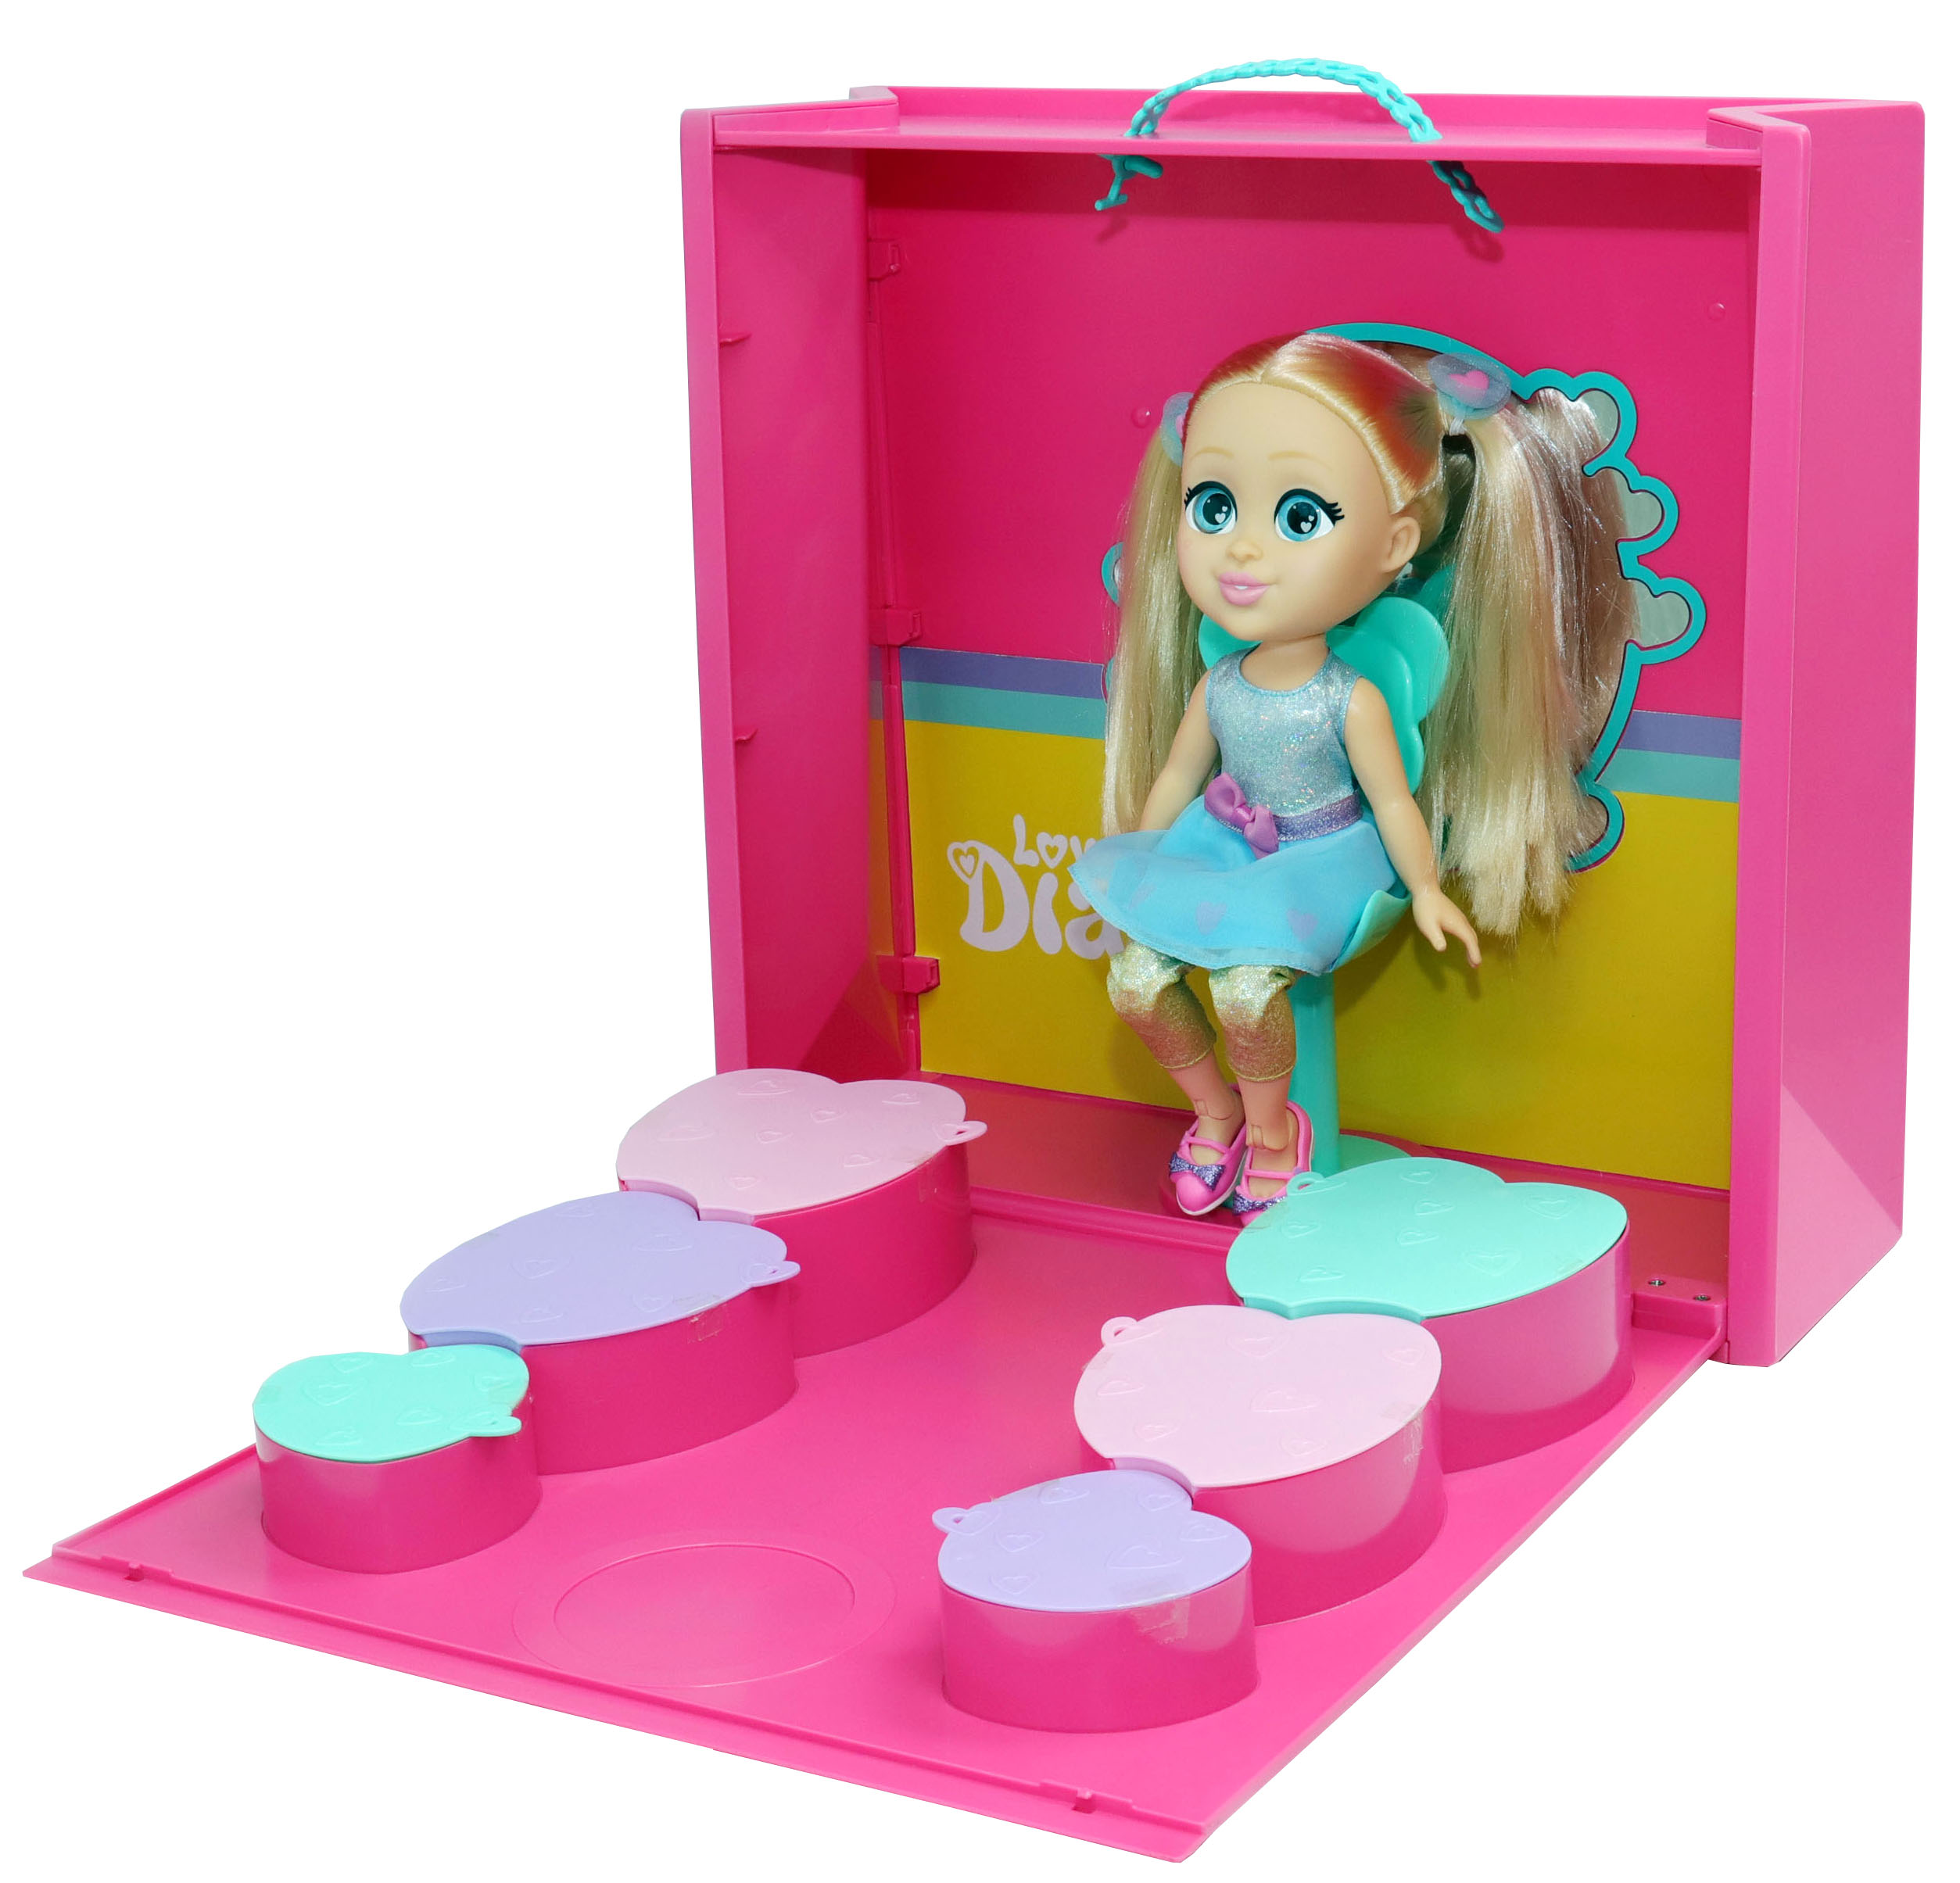 Love Diana Mystery Shopper Playset With 13 inch Doll Plus 12 Surprises, For Ages 3+ - image 4 of 14